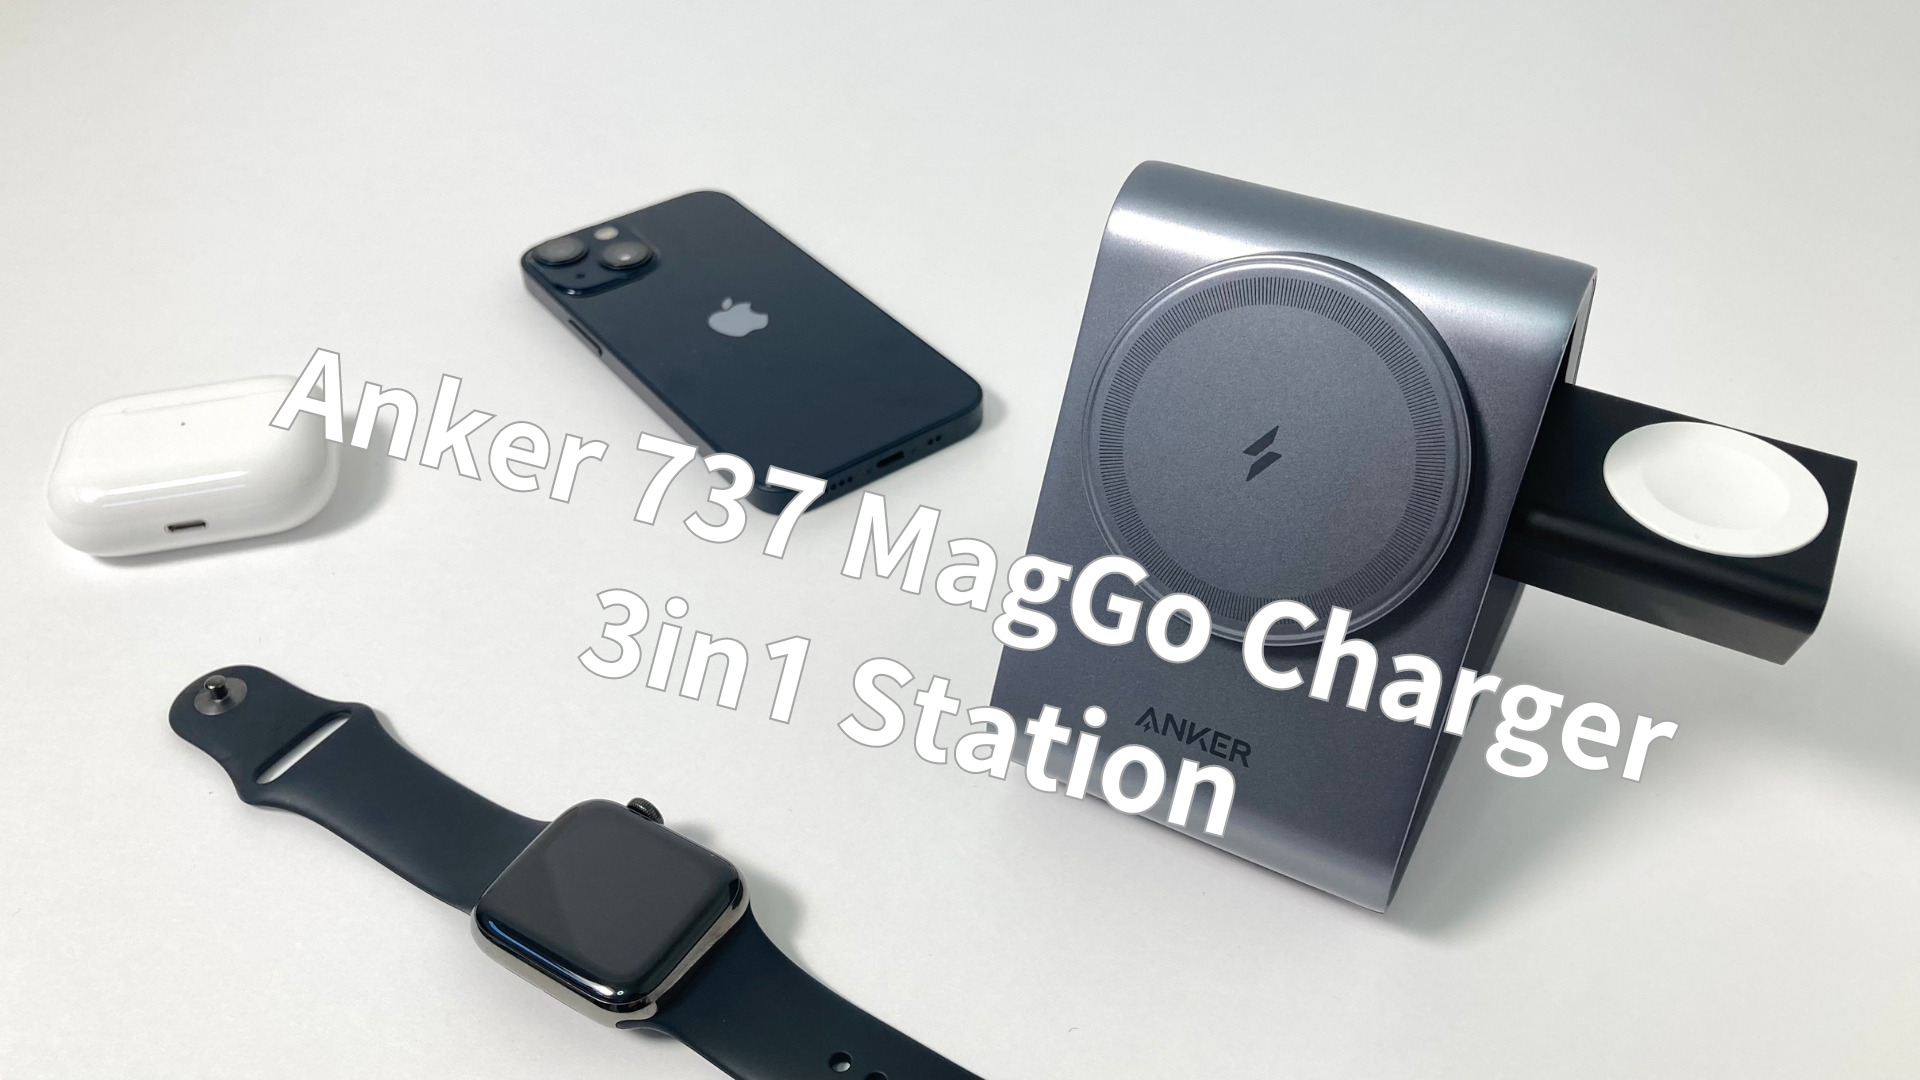 Anker 737 MagGo Charger をレビュー。コンパクトな3in1ワイヤレス充電